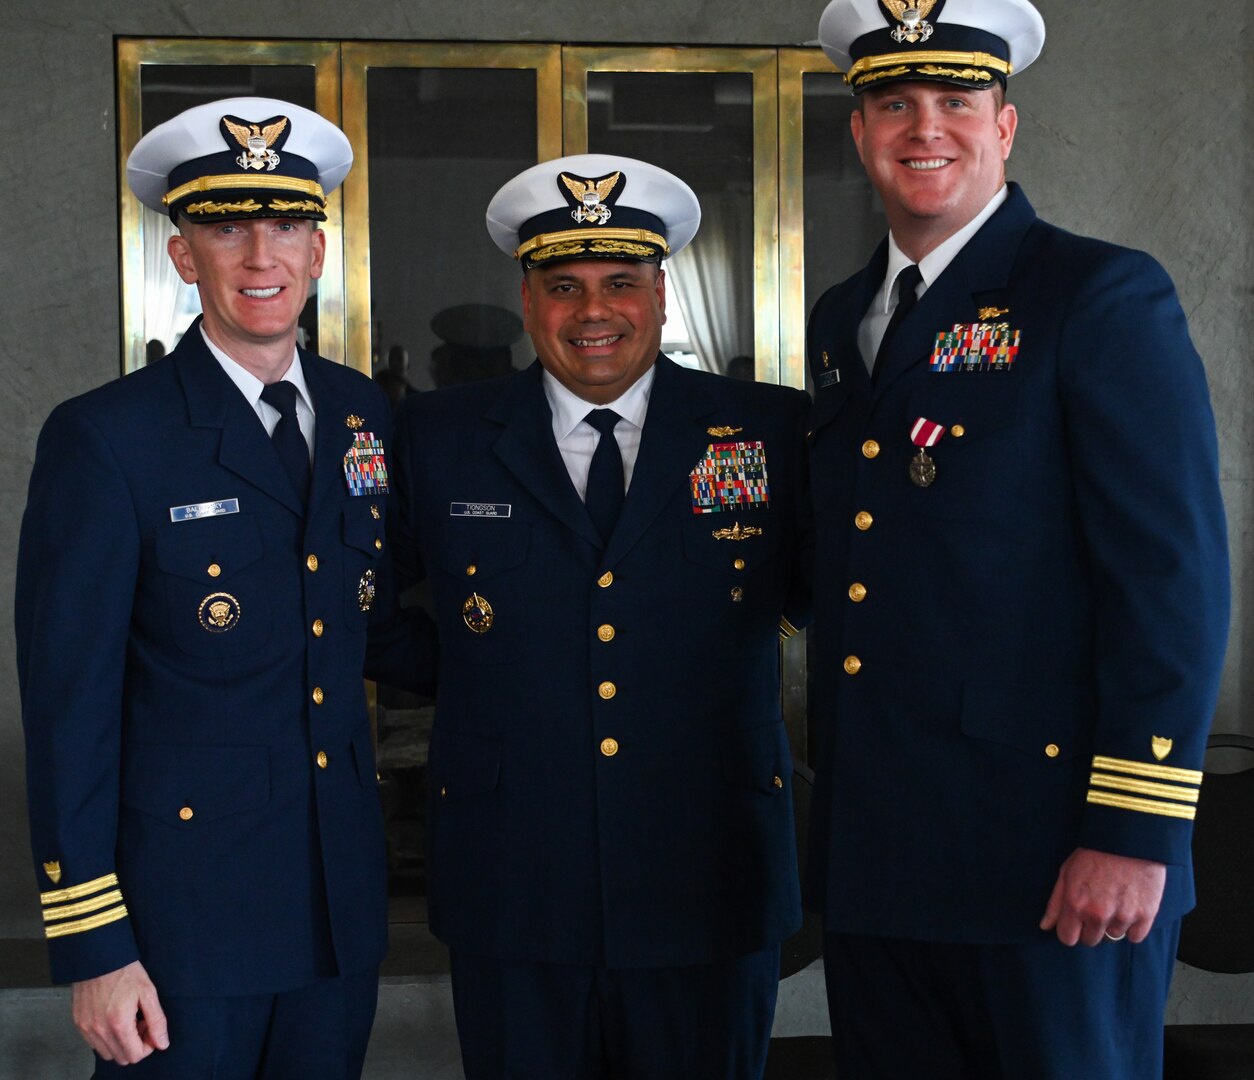 From left, U.S. Coast Guard Cdr. Steven Baldovsky, commanding officer, Alex Haley, Vice Adm. Andrew J. Tiongson, commander, Pacific Area, and Cdr. Brian Whisler, pose for a photo during a change-of-command ceremony at Base Kodiak, June 13, 2023. The change-of-command ceremony is a historic Coast Guard and Naval tradition, which has remained unchanged for centuries and includes the reading of the command orders in the presence of all unit crewmembers. U.S. Coast Guard photo by Petty Officer 3rd Class Ian Gray.